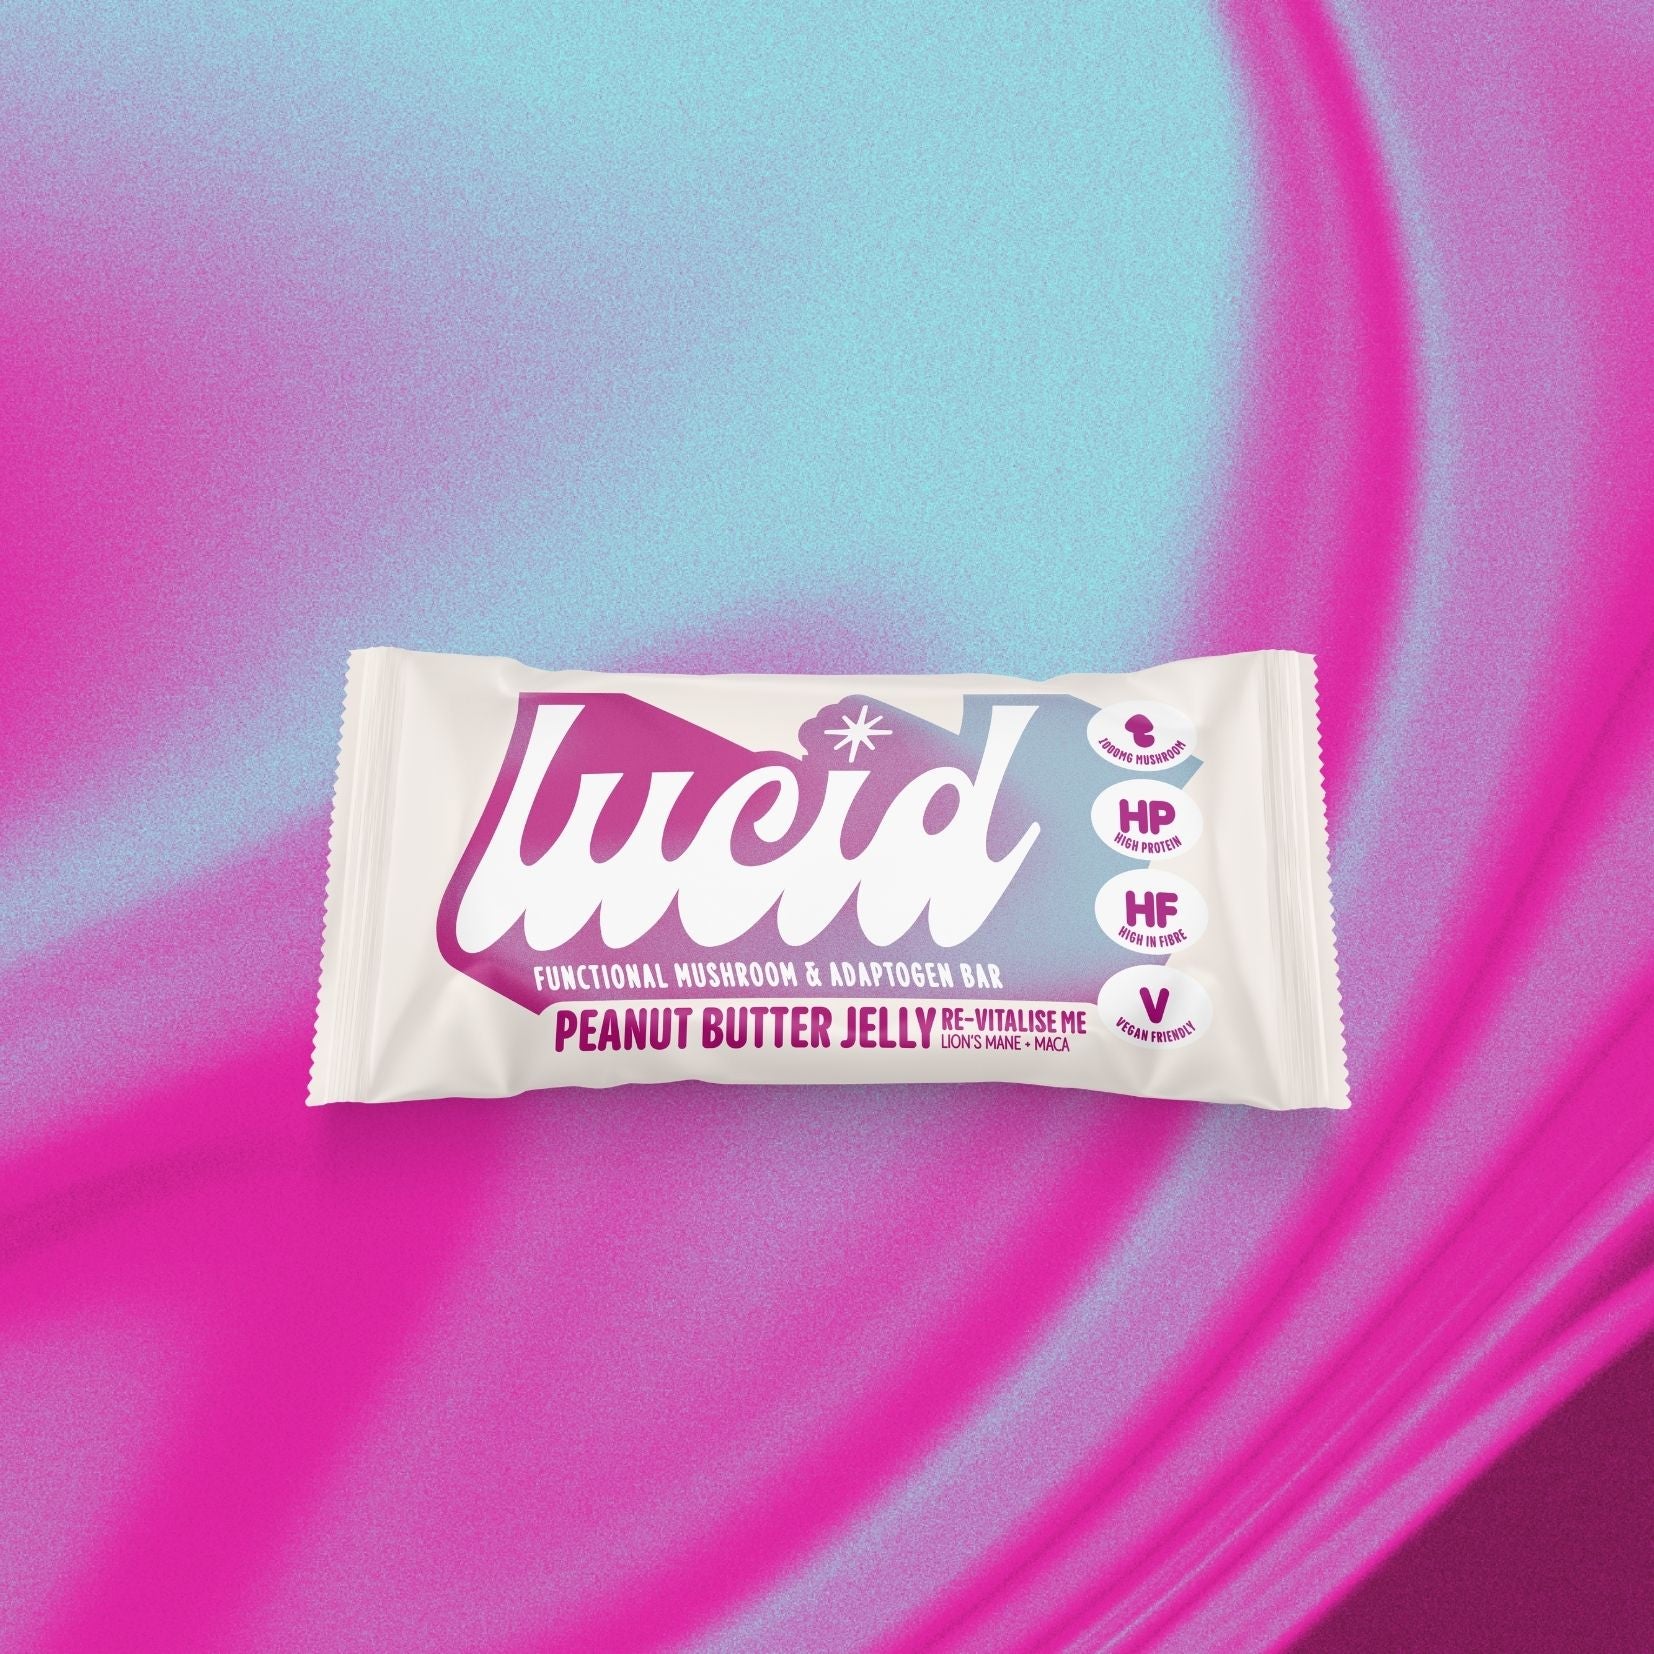 Lucid's energy boosting Peanut Butter and Jelly Snack Bar infused with functional mushrooms and adaptogens.